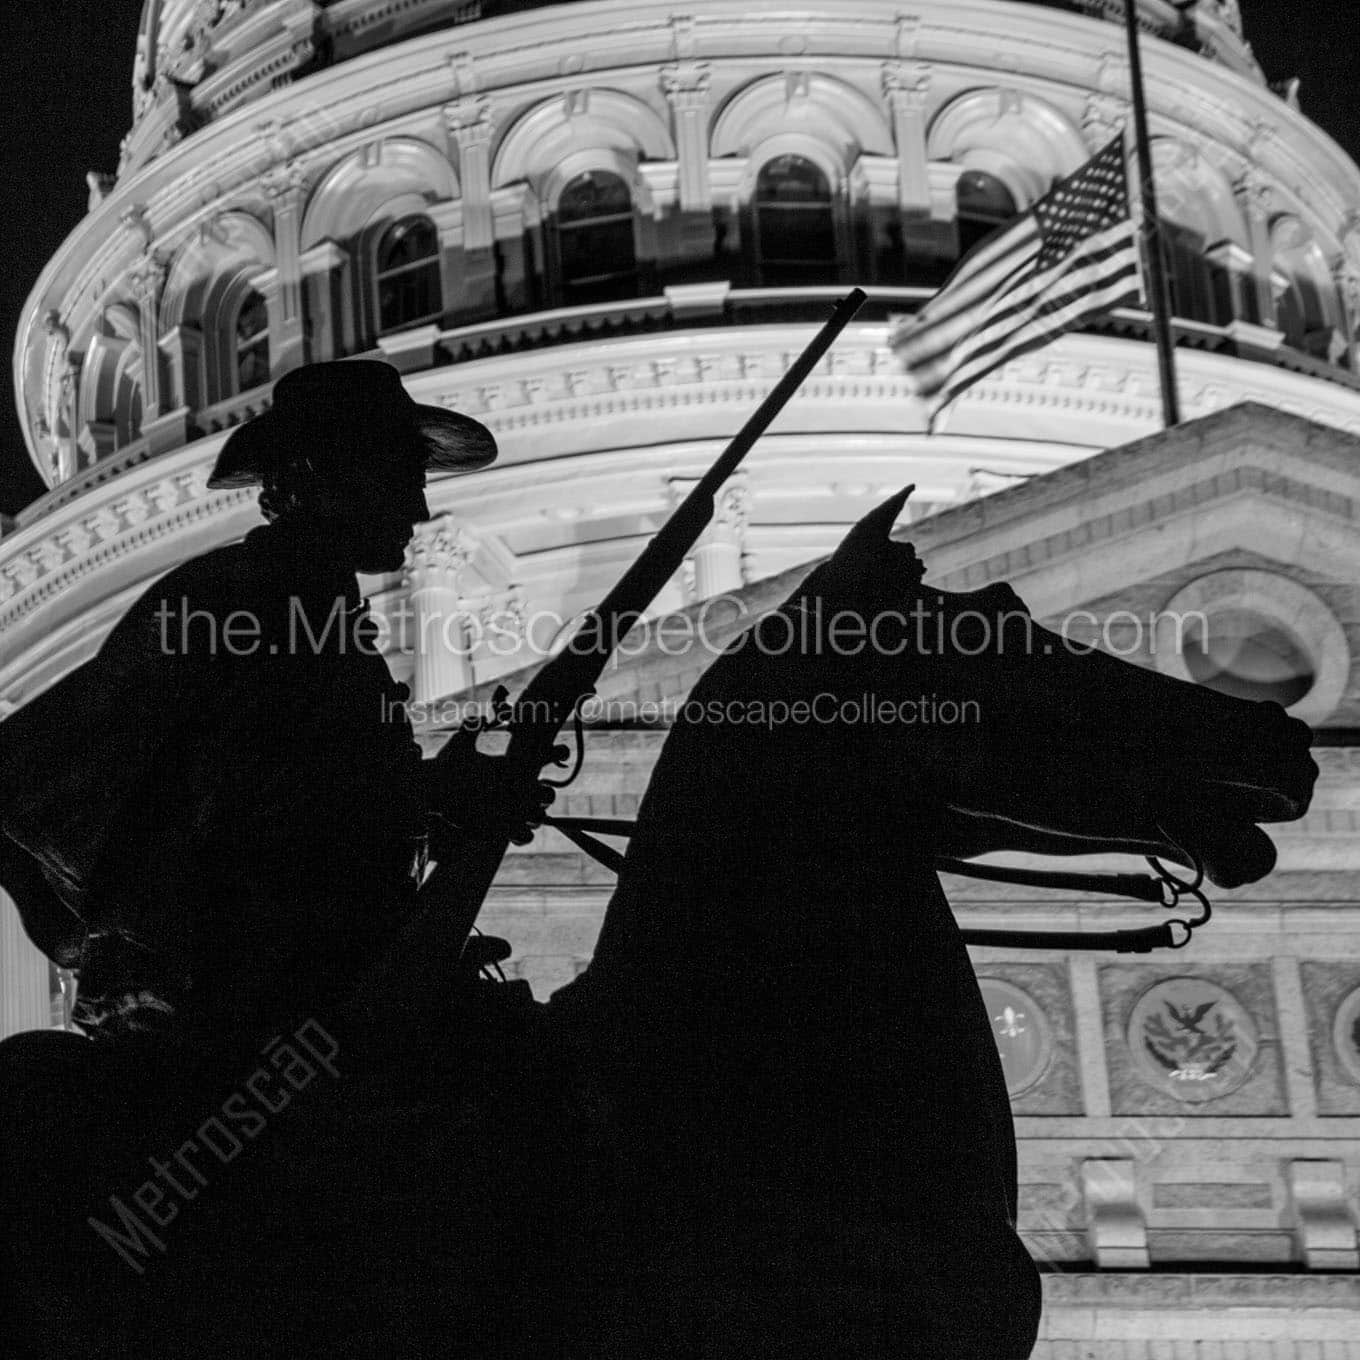 texas ranger statue with texas statehouse behind Black & White Office Art